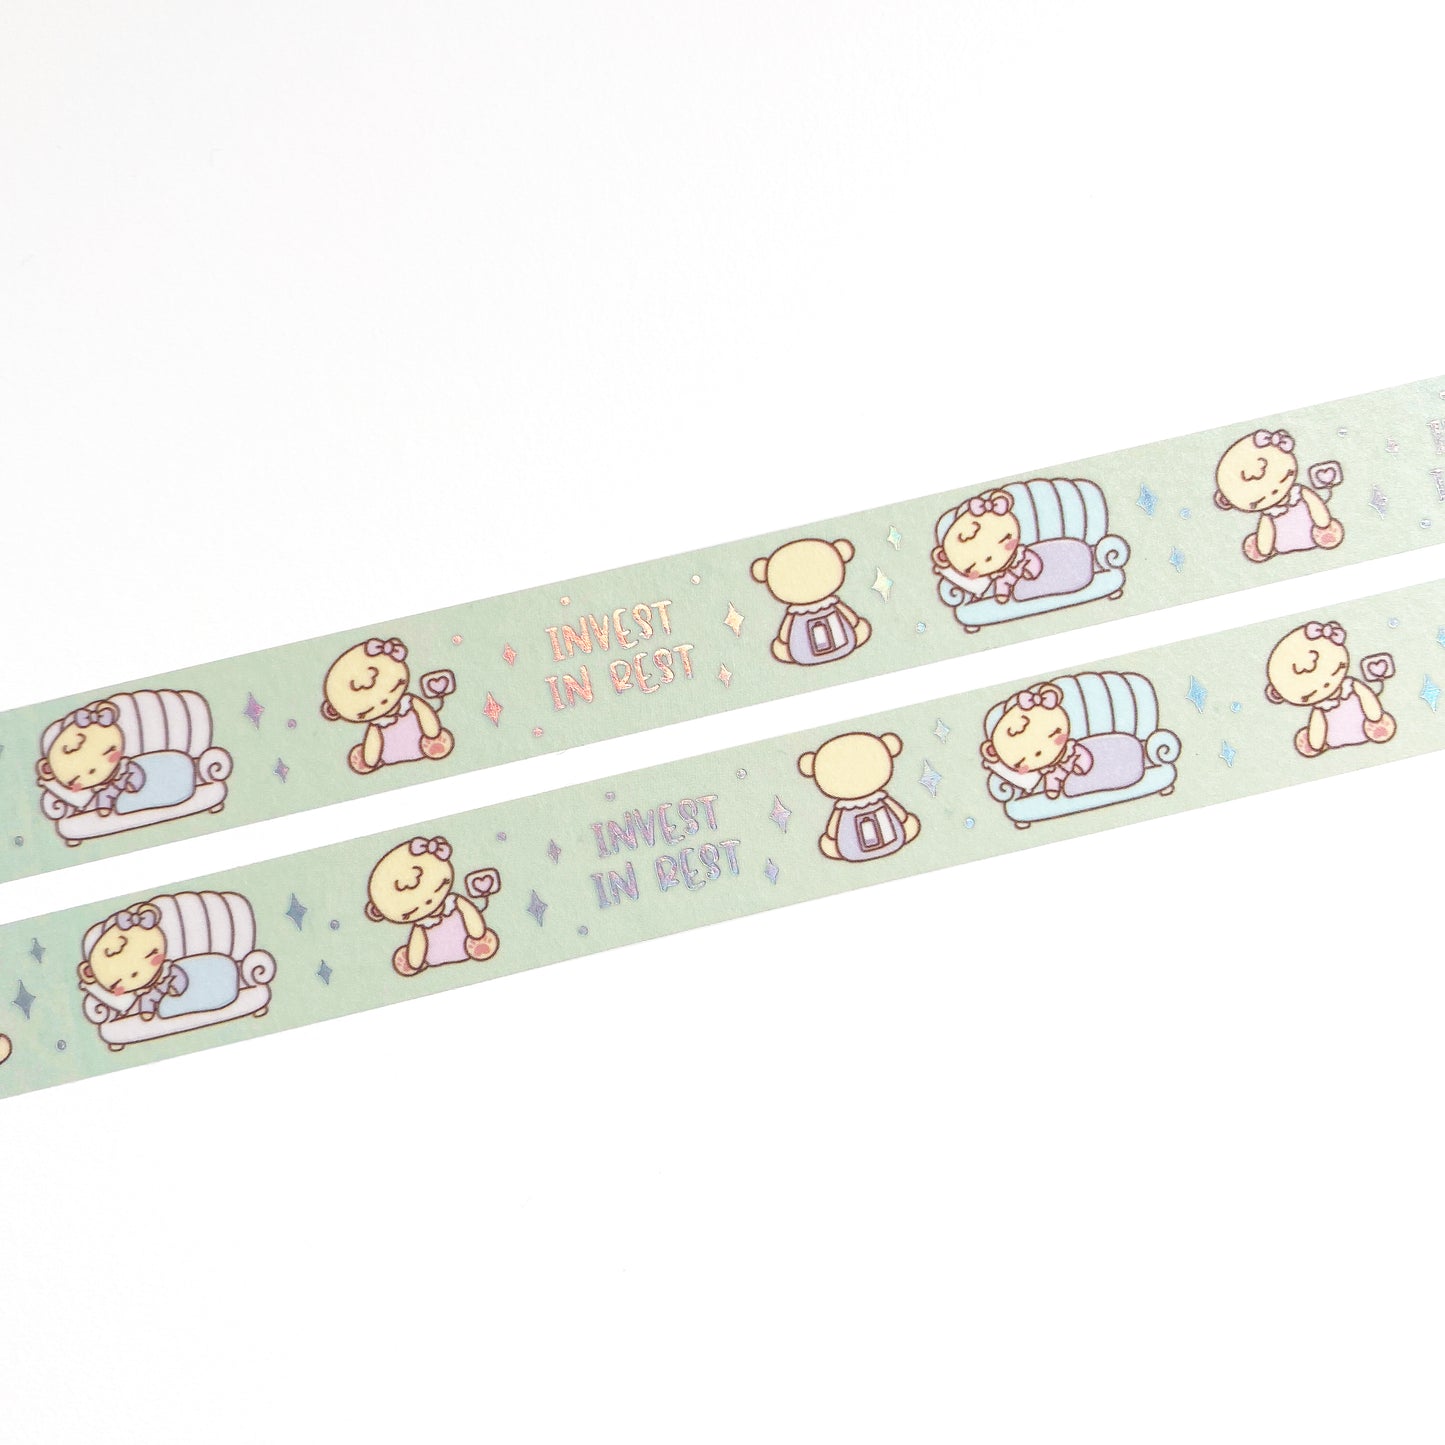 Invest in Rest Washi Tape | Silver Holographic Foil |